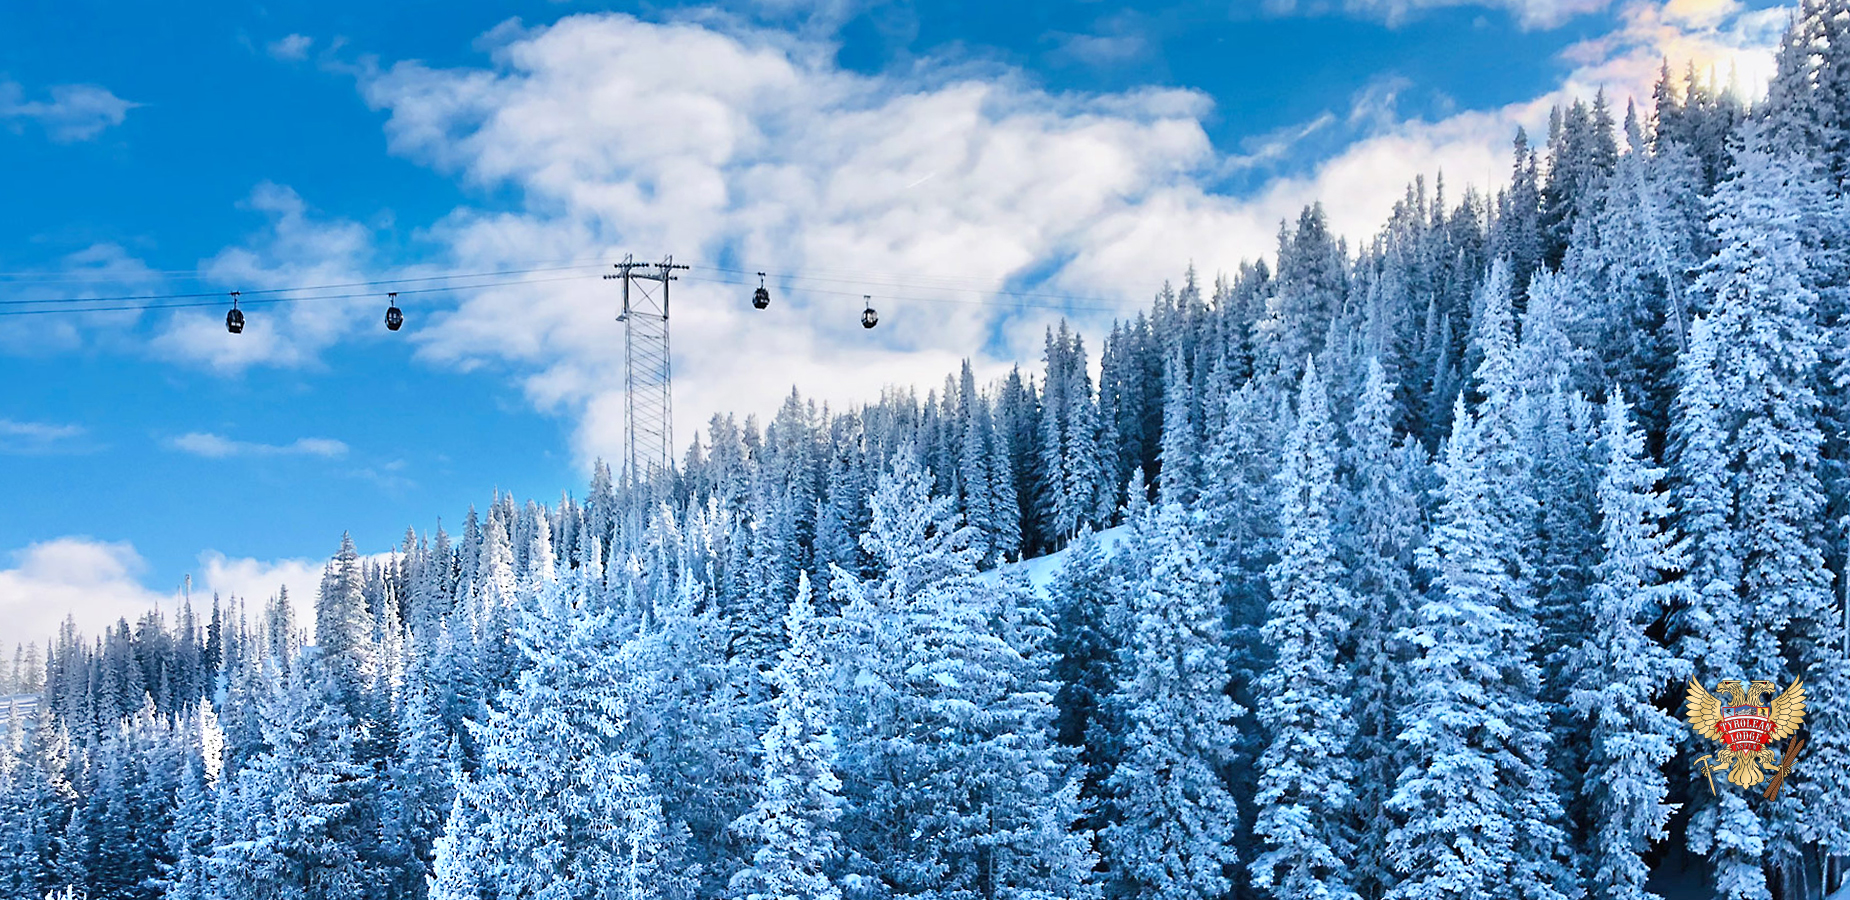 Snow covered pines on the slopes of Ajax Mountain under the Silver Queen gondola